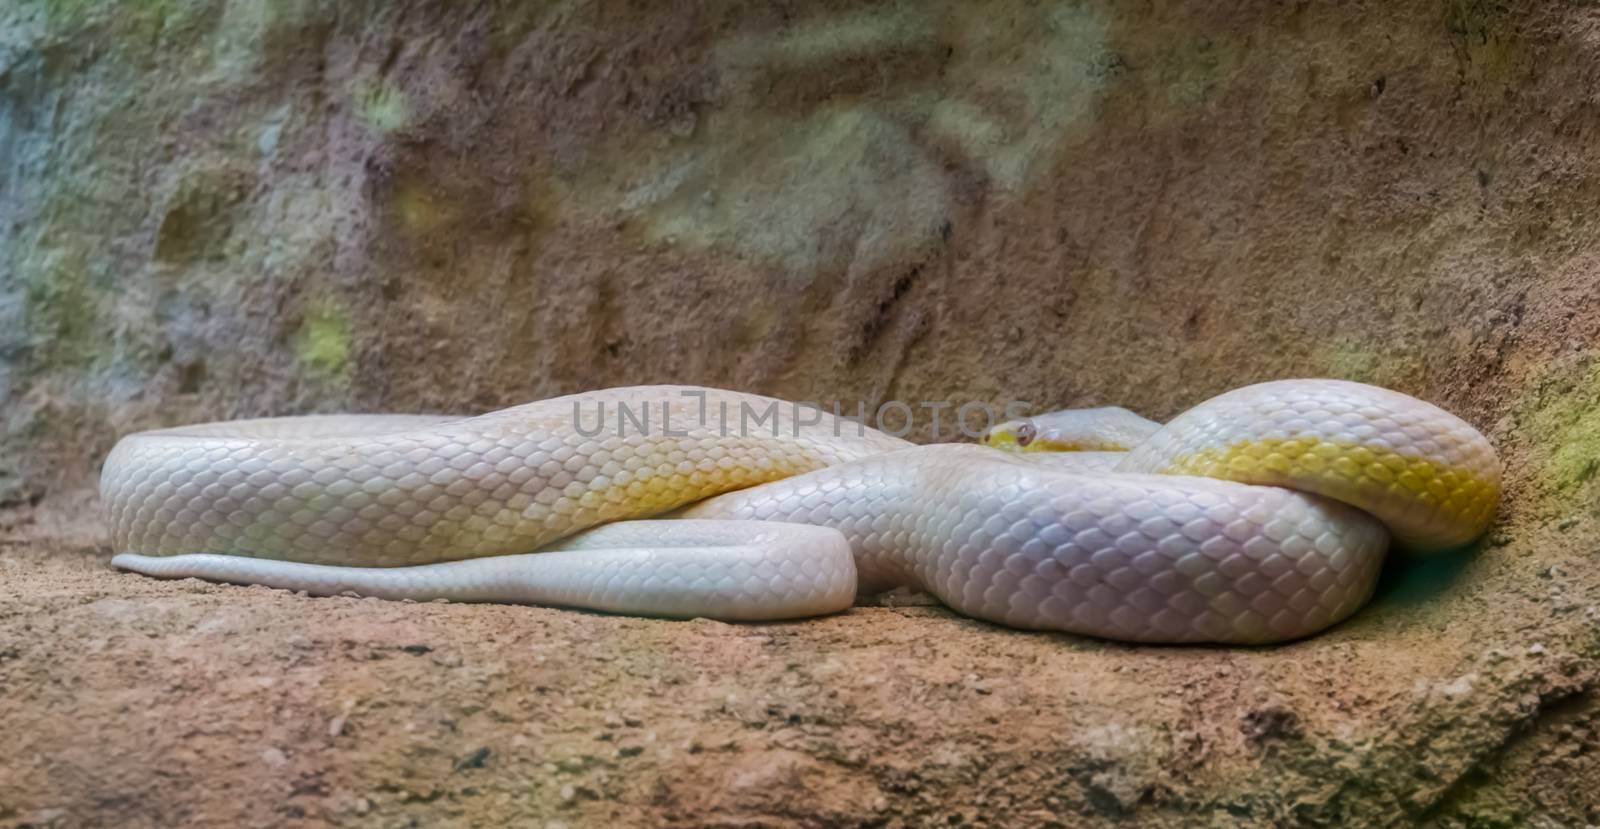 White western rat snake, serpent with albinism, color mutation, popular reptile specie from America by charlottebleijenberg